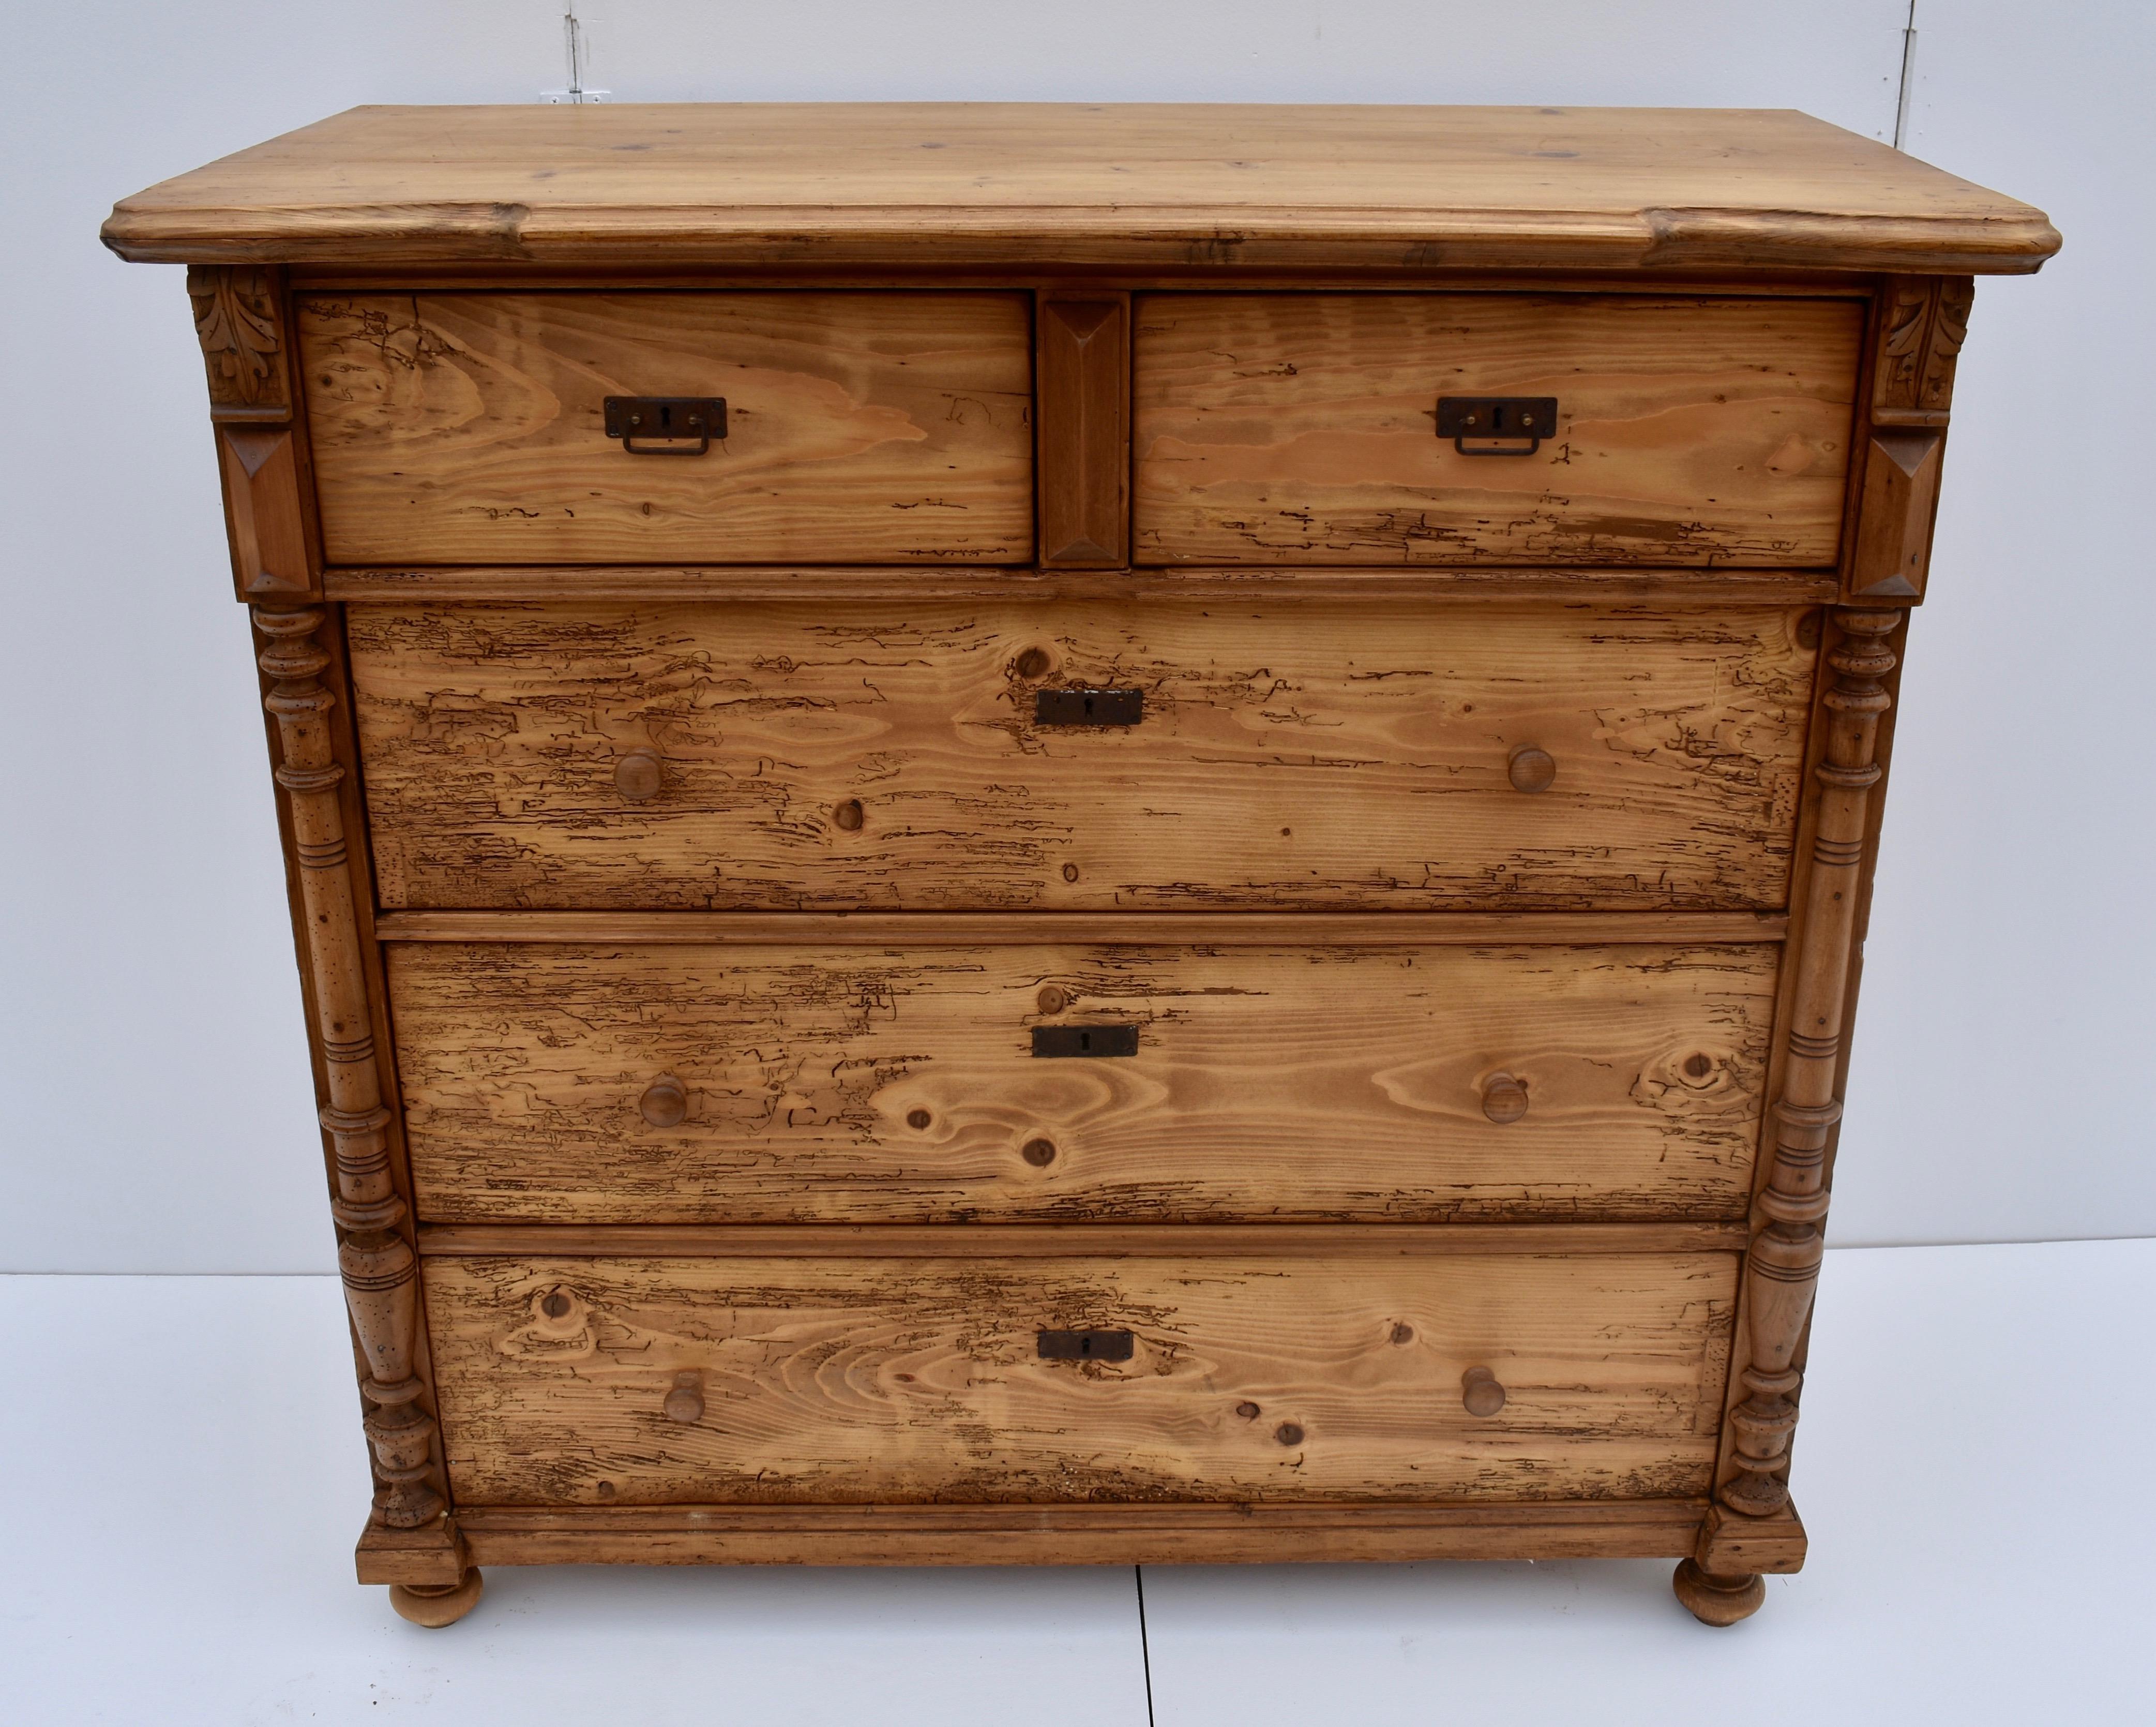 This massive chest of five deep handcut dovetailed drawers has a routed breakfront top, with the two top drawers standing slightly proud of the other three. The front corners are decorated in hardwood with split columns, elongated pyramid moldings,